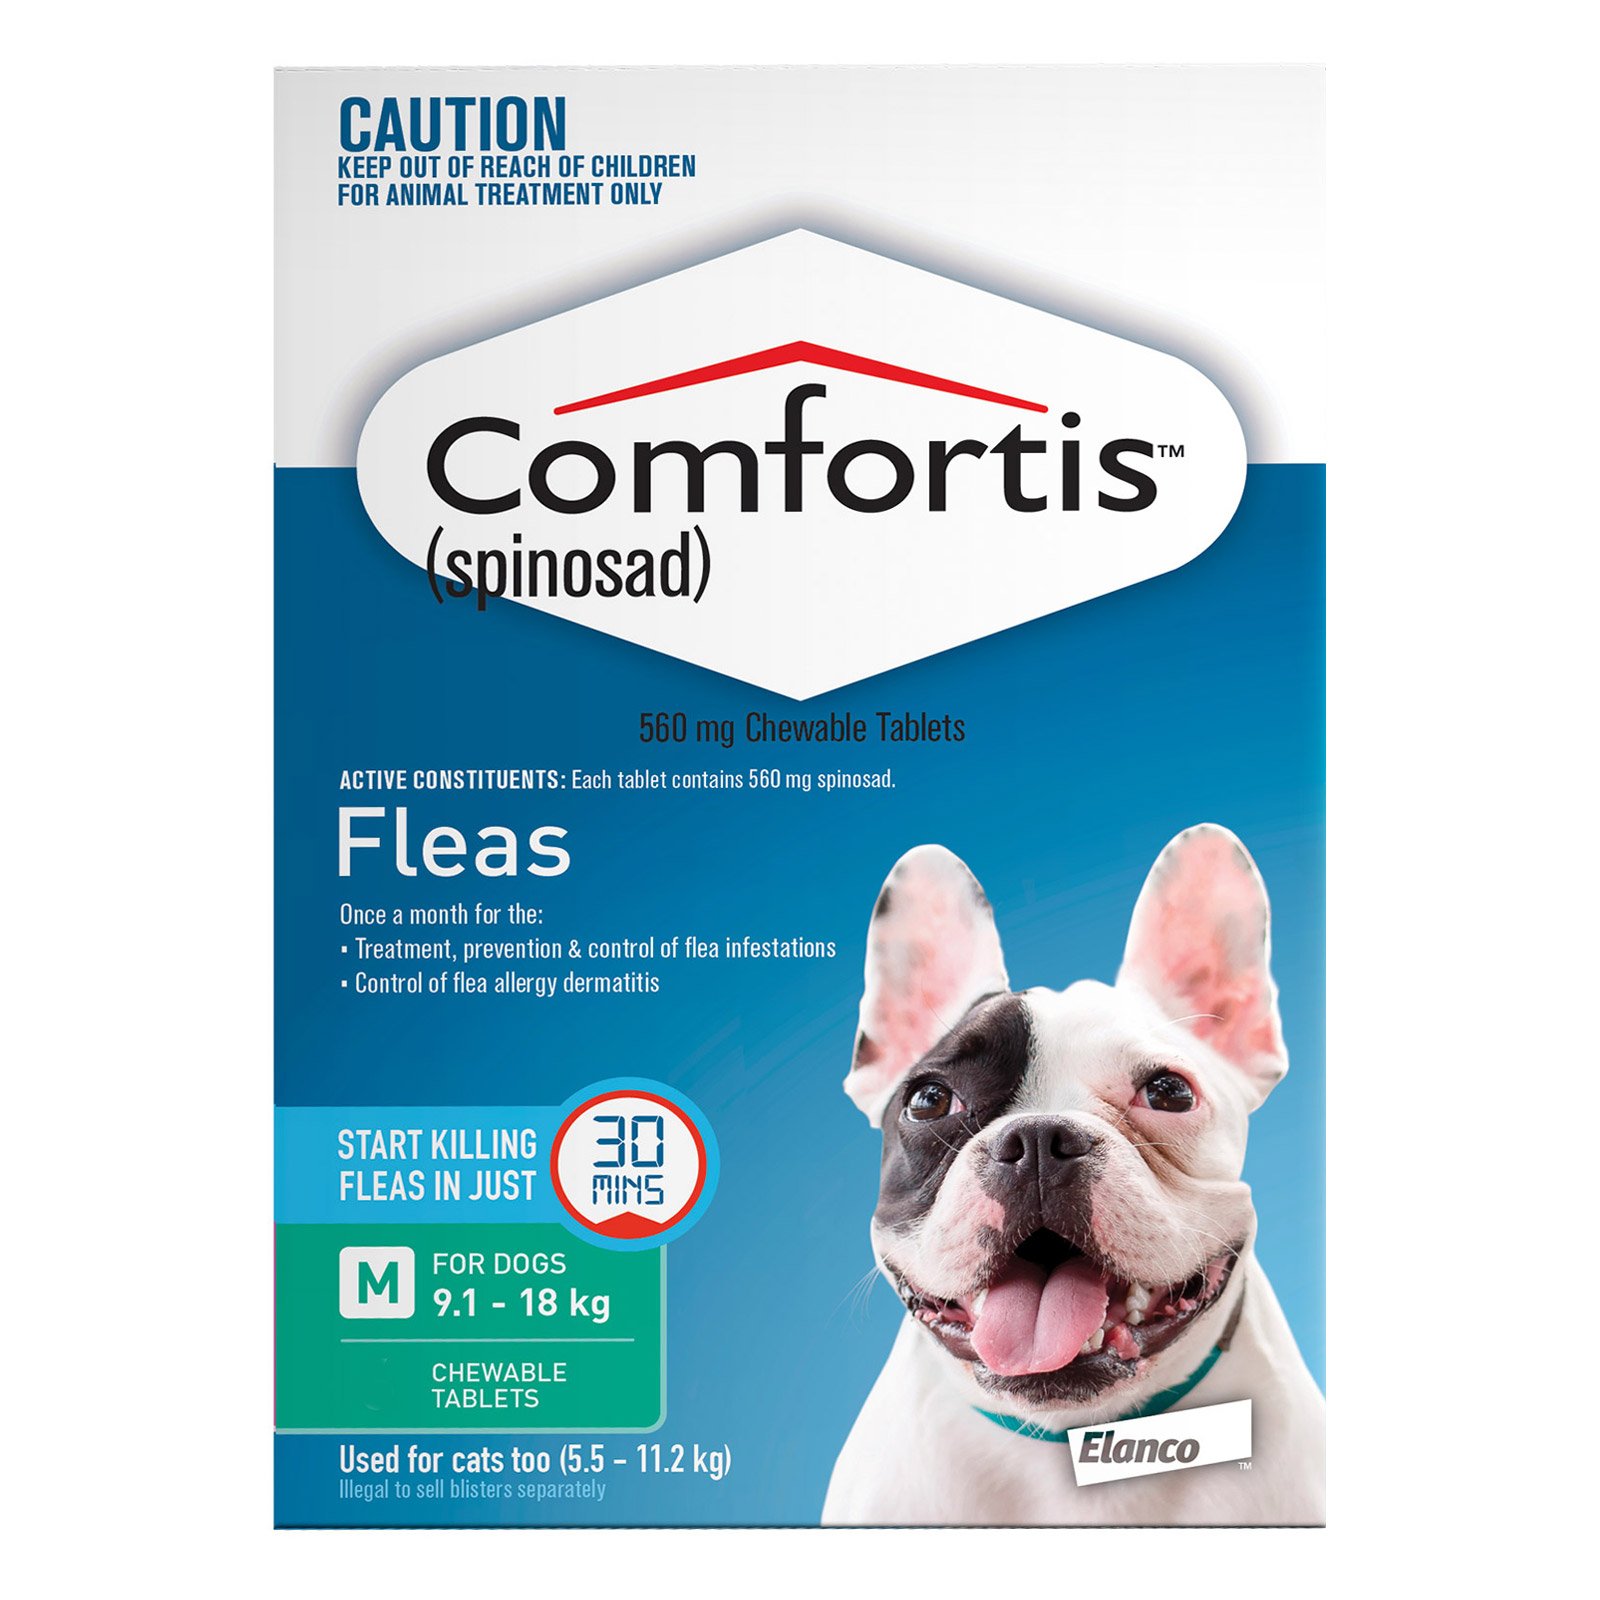 Comfortis For Dogs 9.1 - 18 Kg (Green)